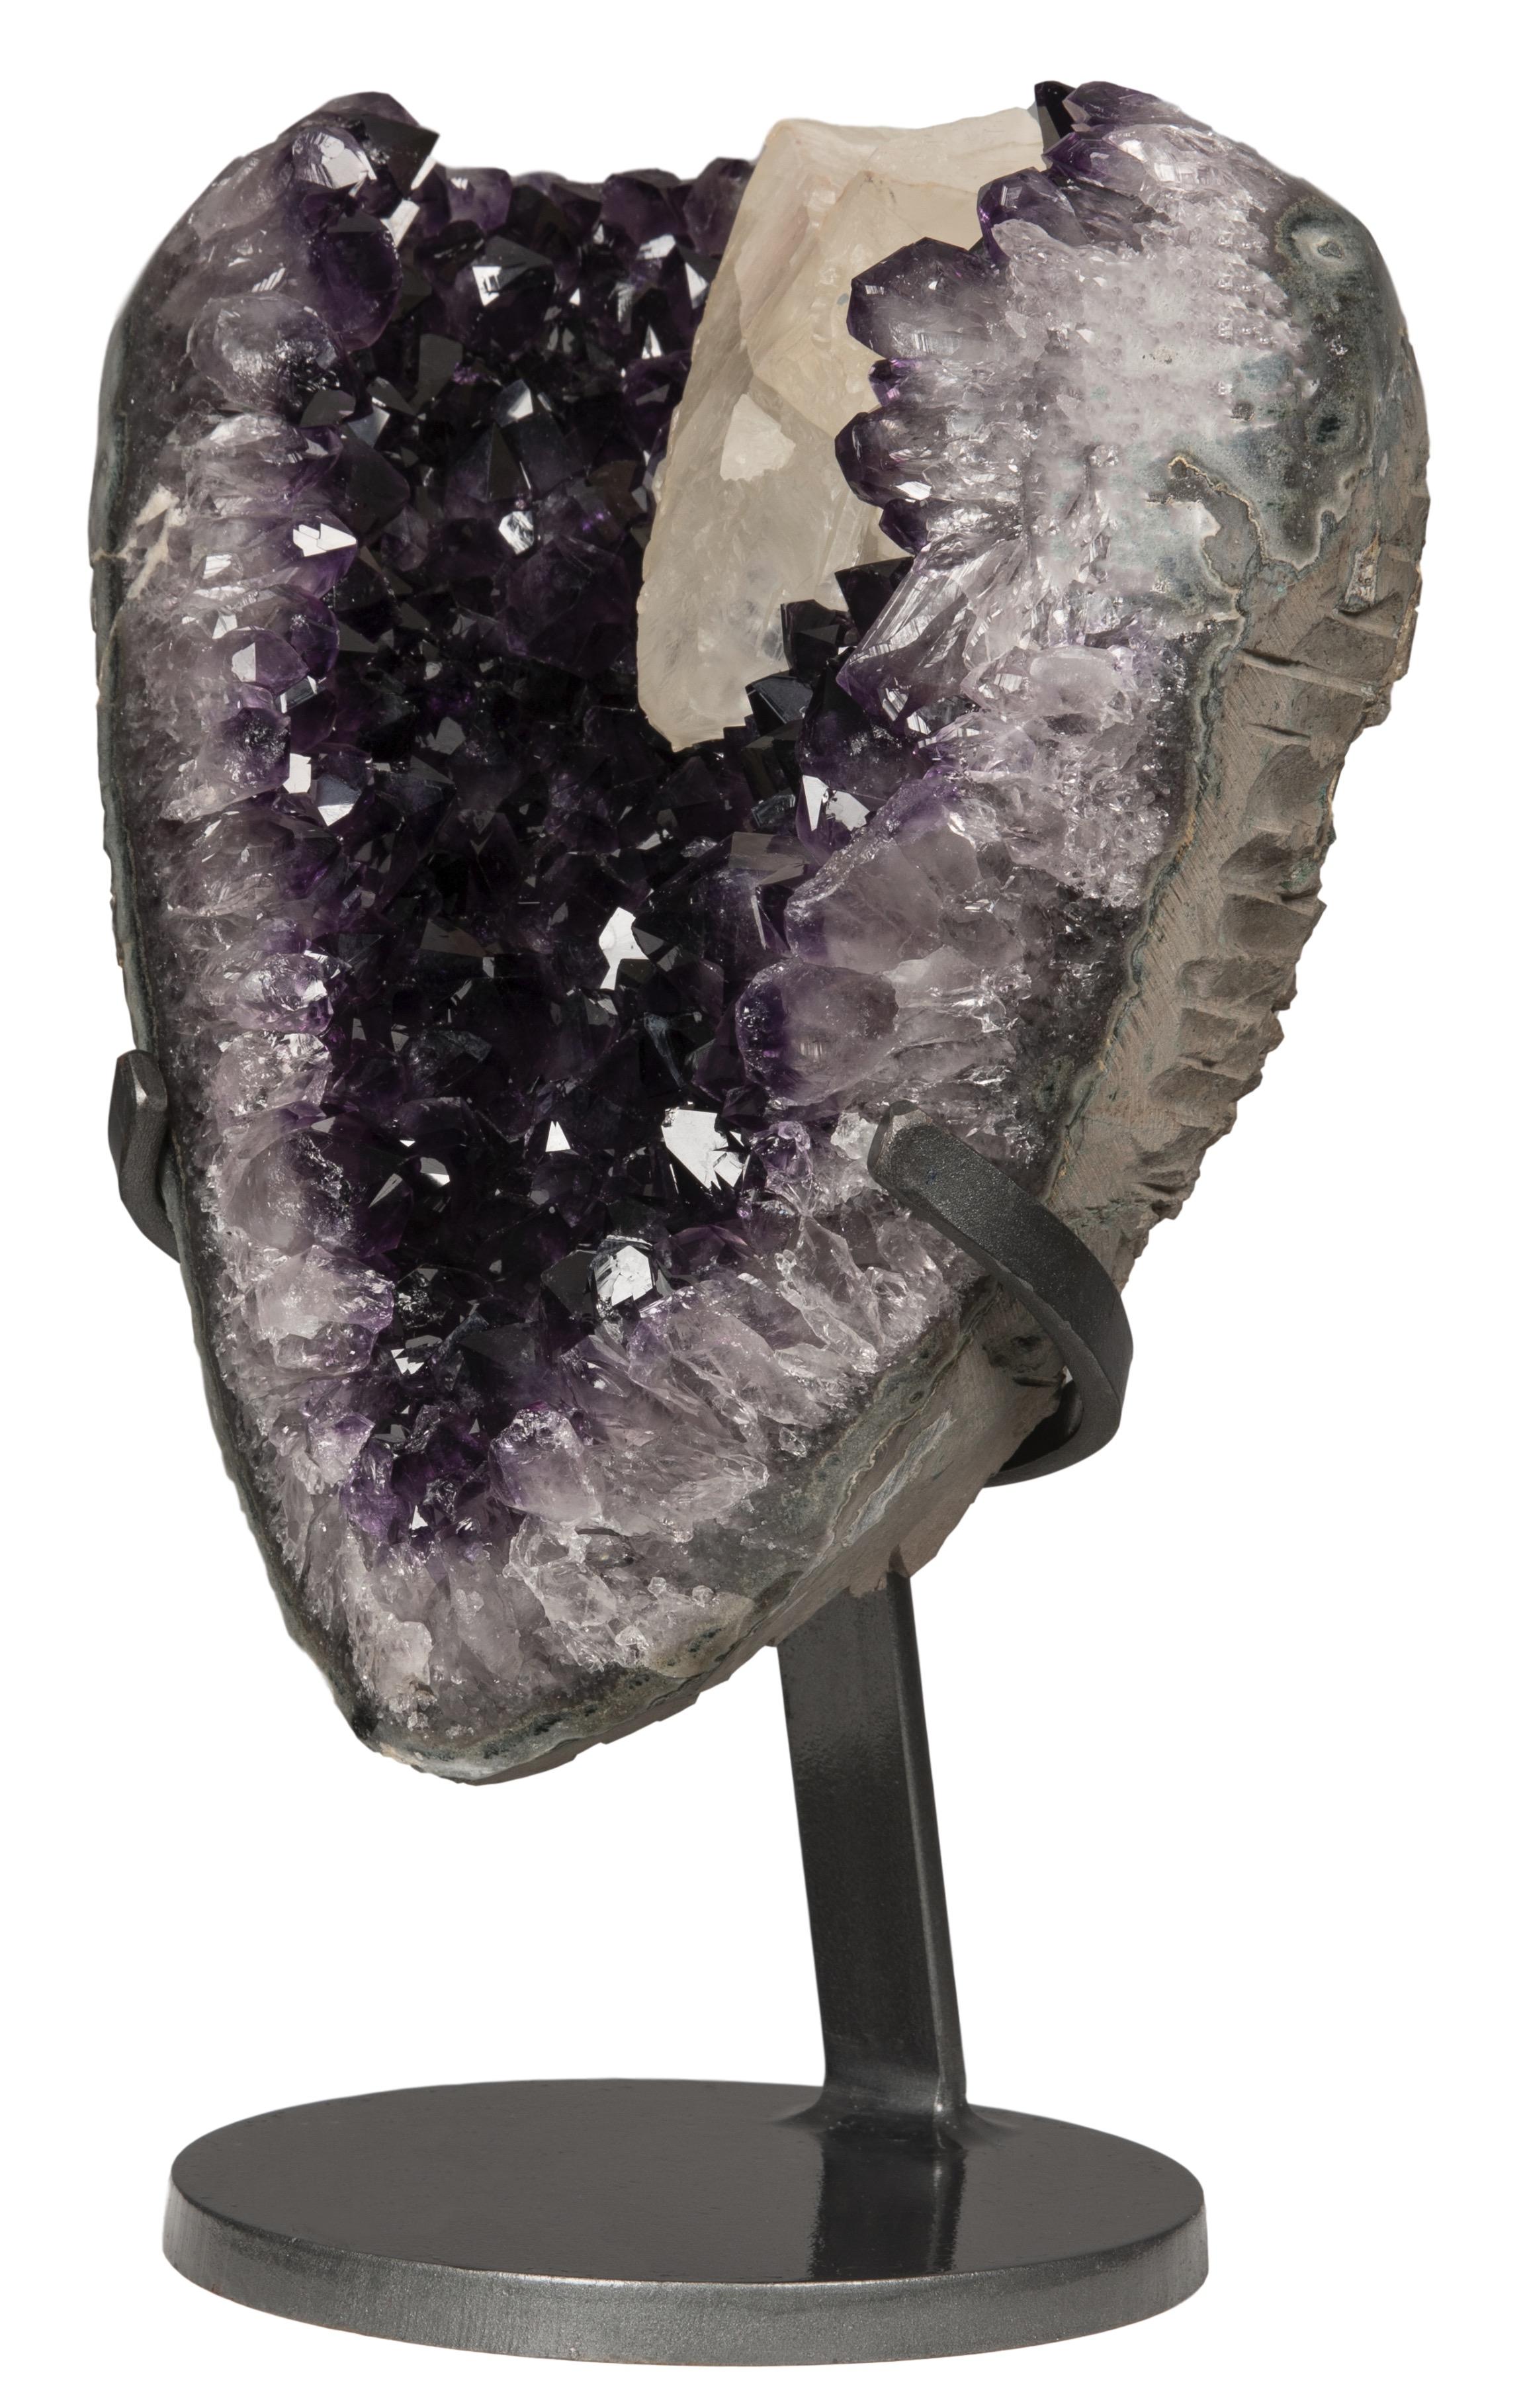 Uruguayan Deep Purple Amethyst Cluster with Calcite and Grey Druze on Metal Stand